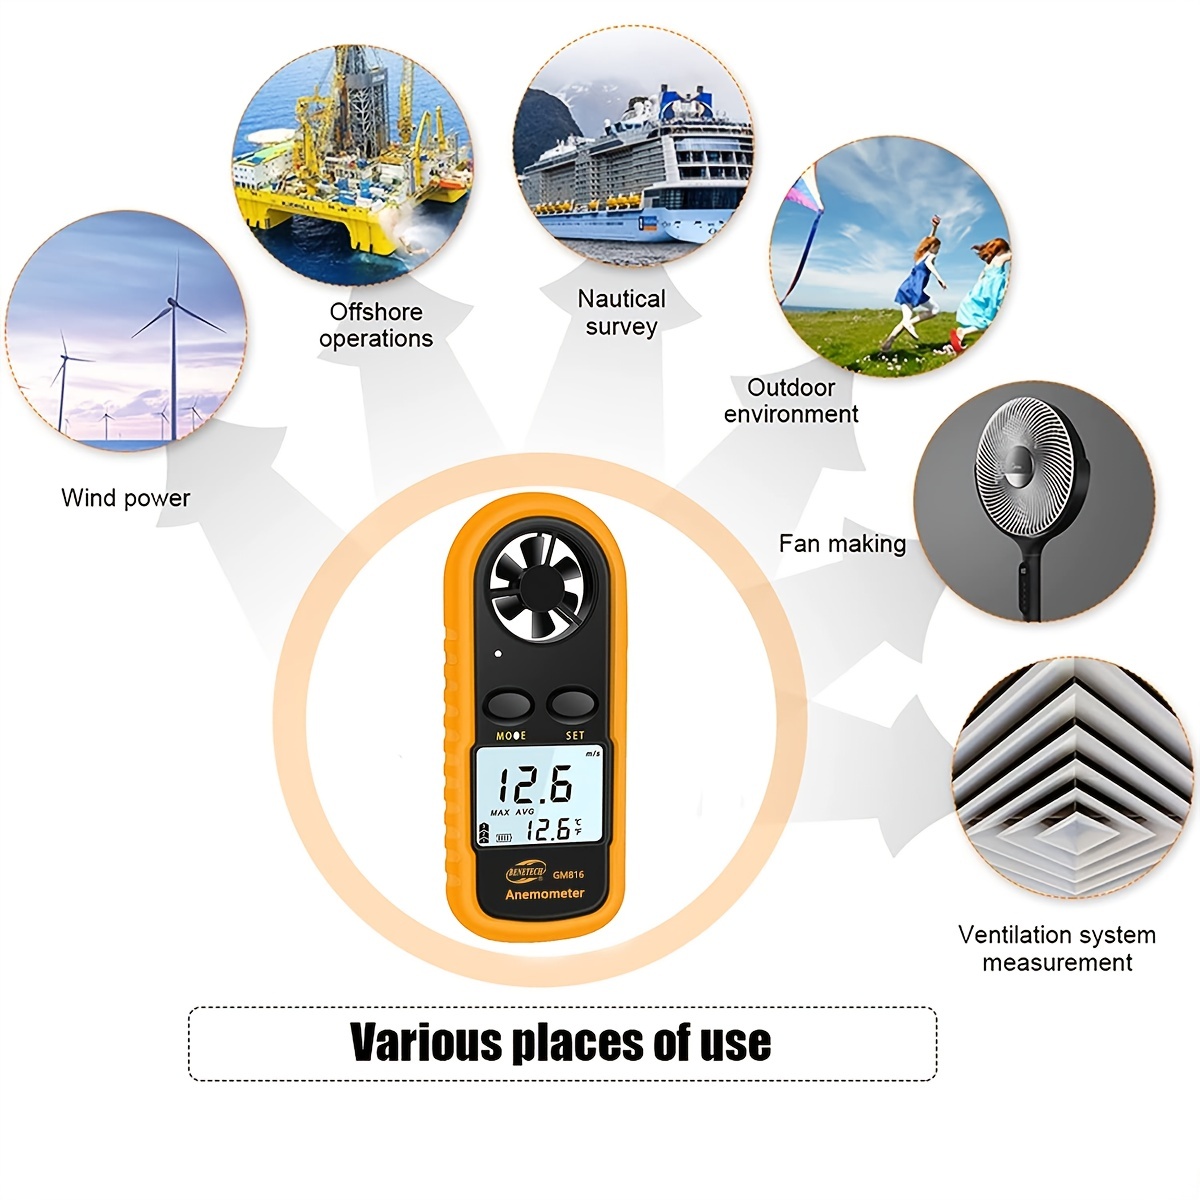 Qotone GM816 Portable Air Velocity Wind Speed Temperature Gauge - Safety  Solutions and Supply